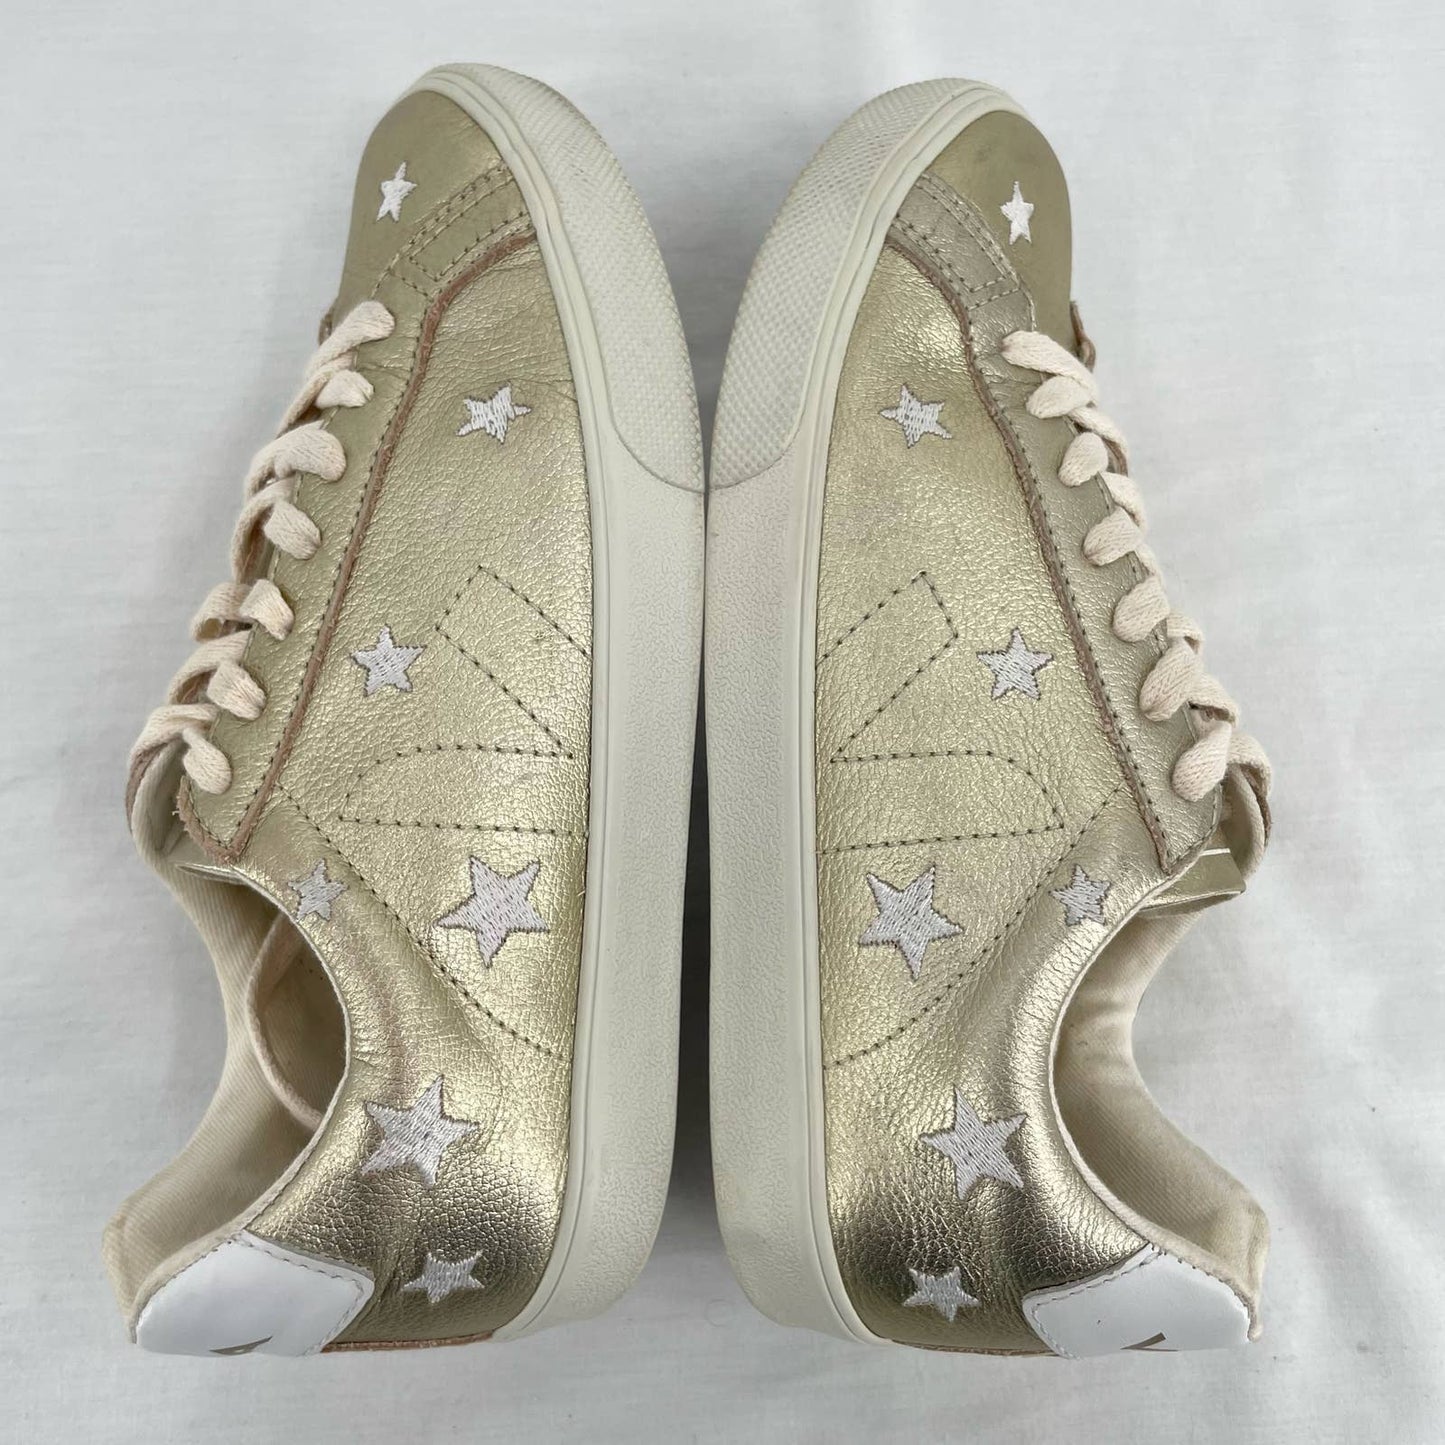 Madewell x Veja Esplar Low Sneakers White Star Embroidery Gold Leather Size 6 | EU 37